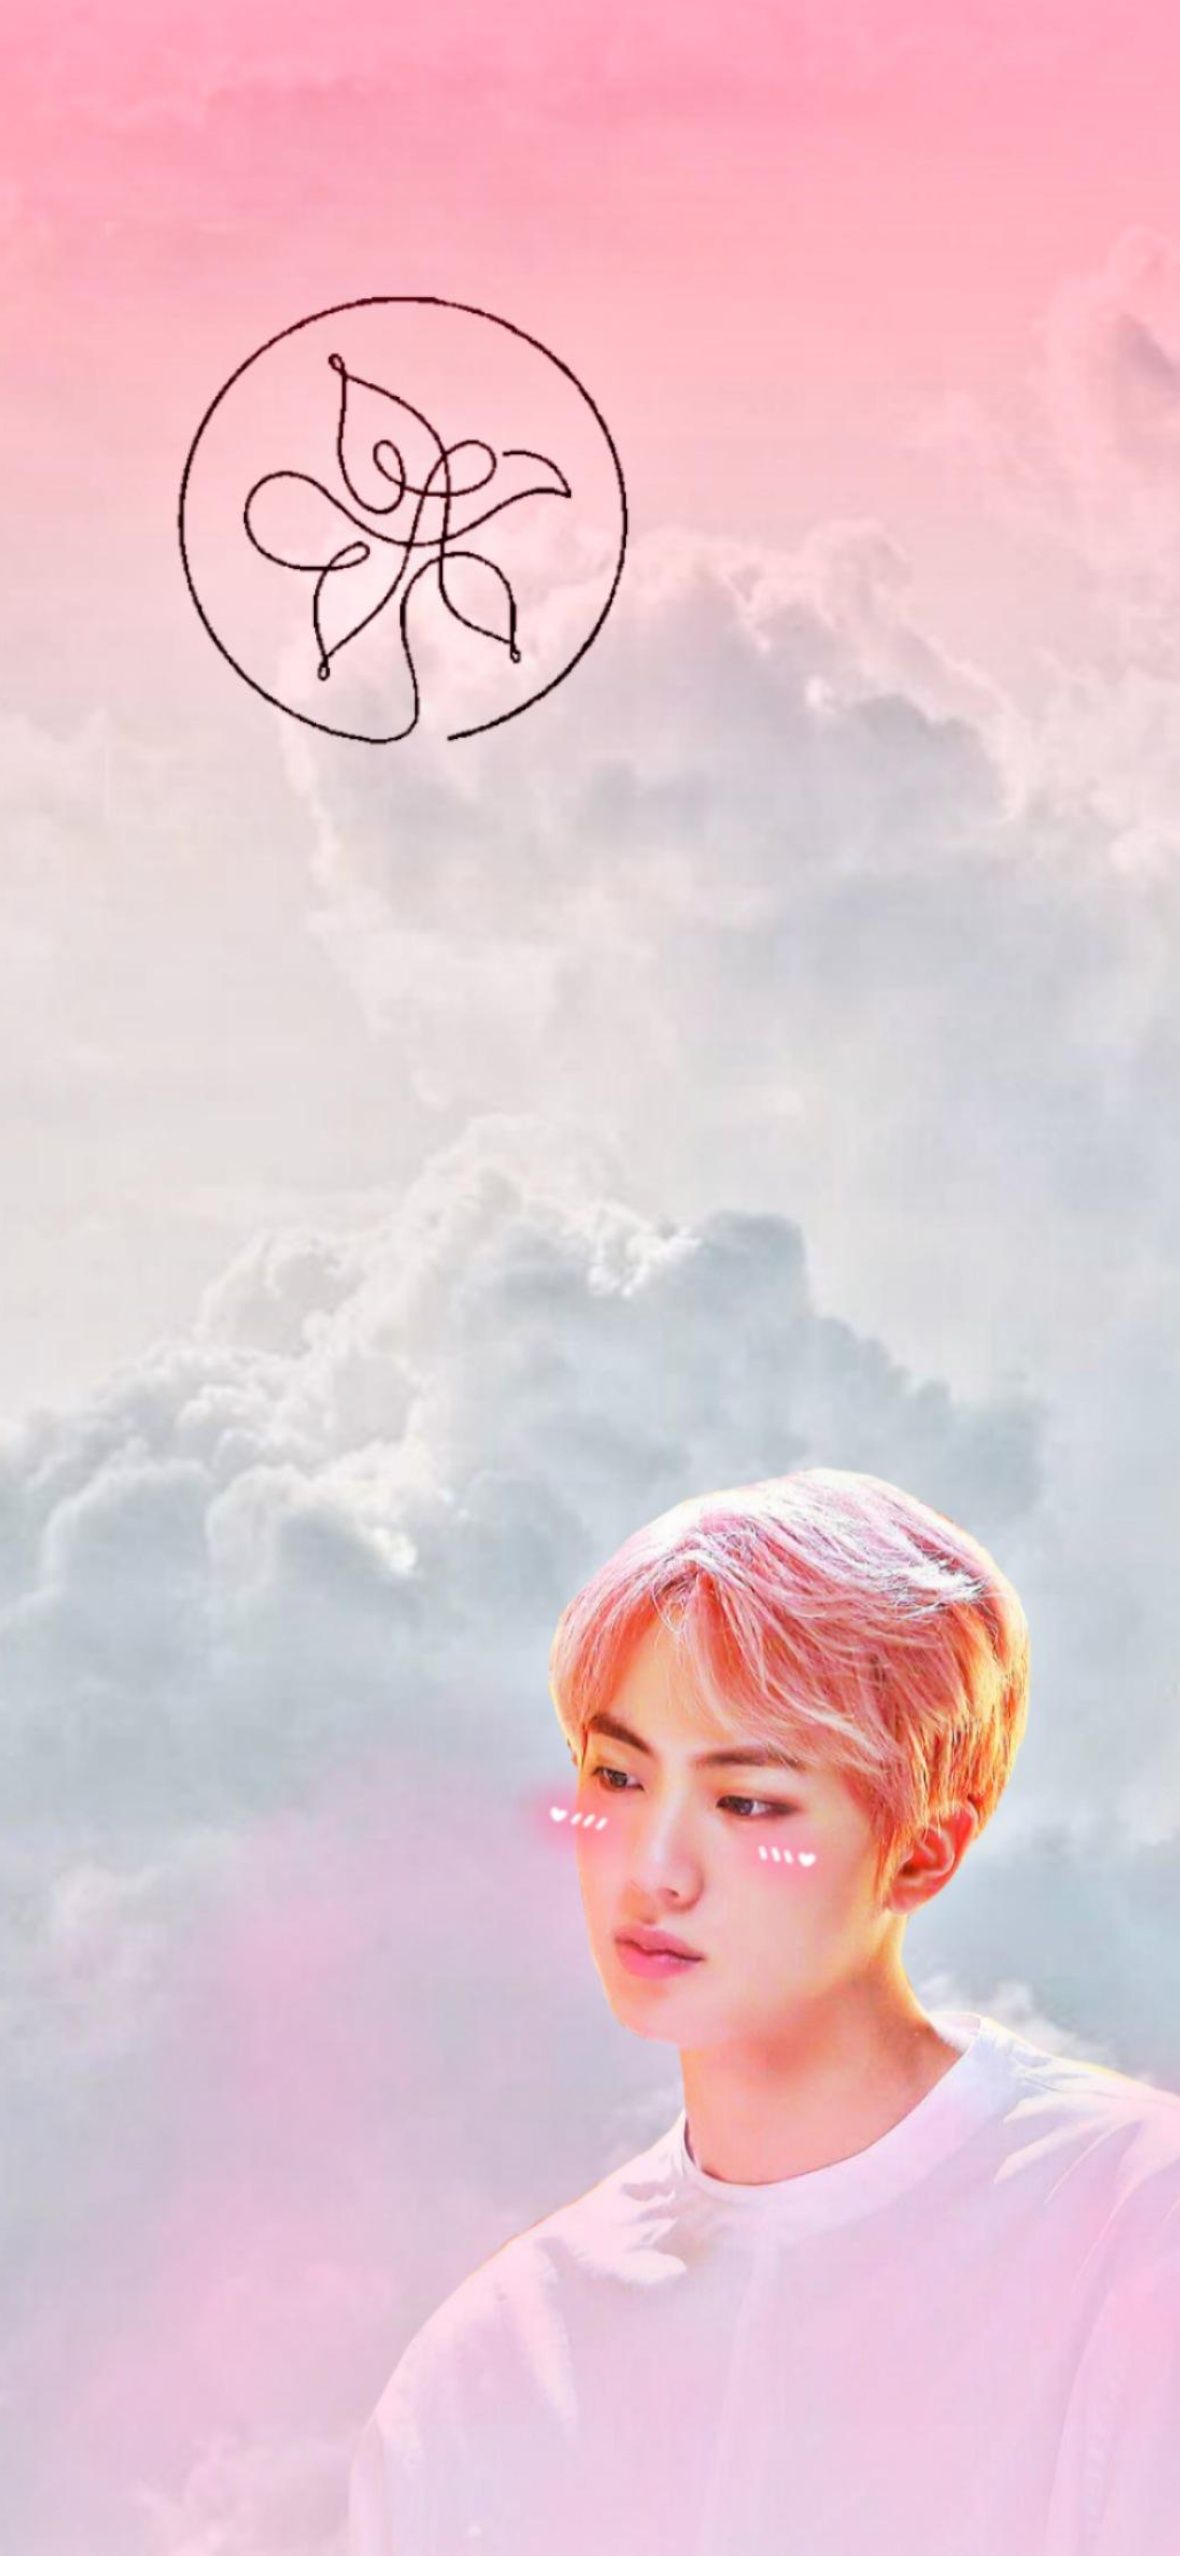 BTS wallpaper with the most beautiful cloud background - BTS